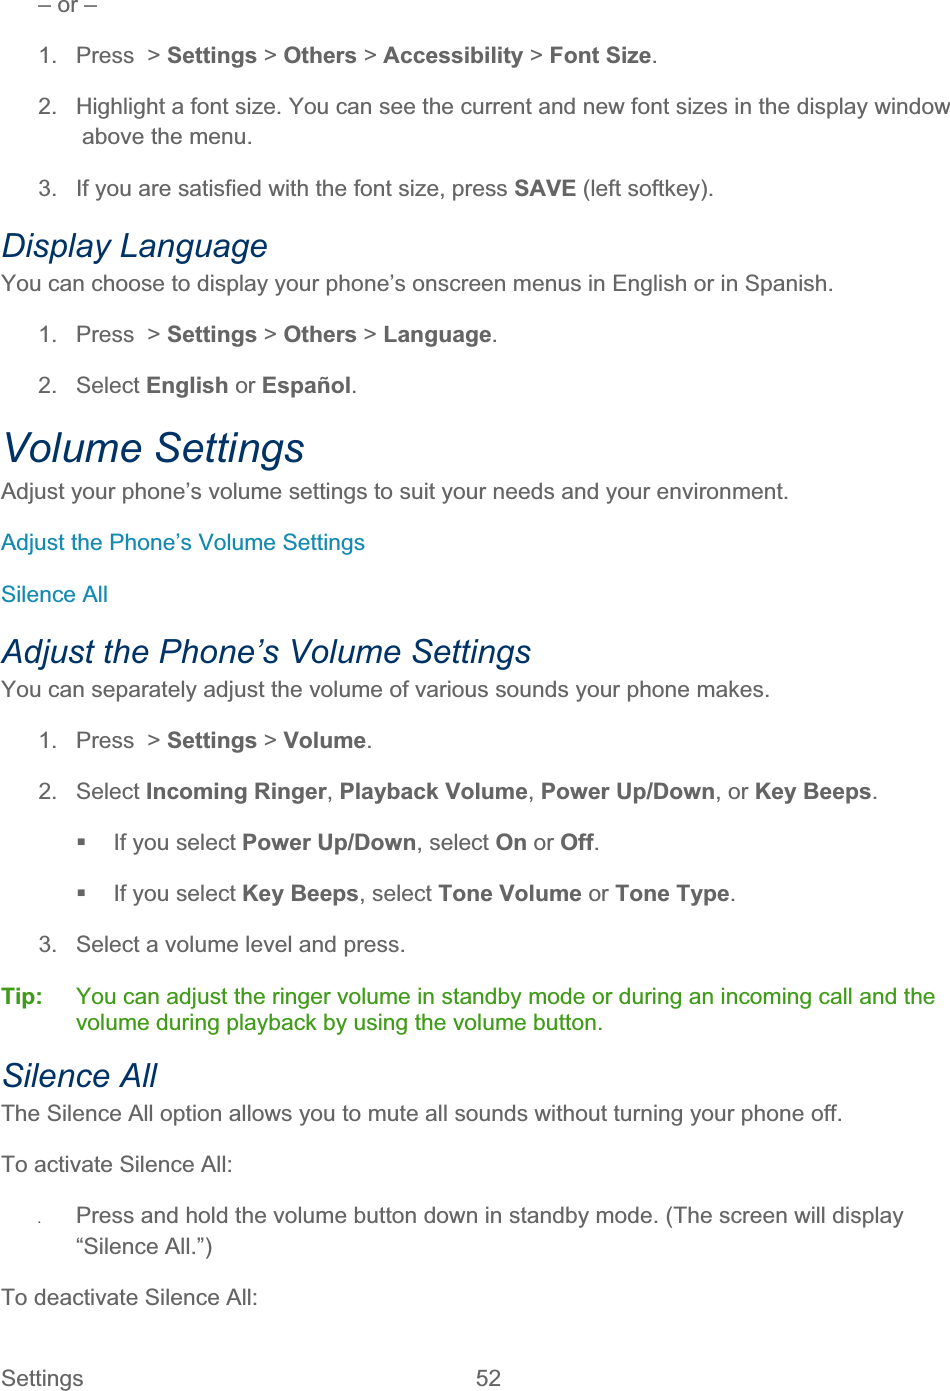 Settings 52   – or – 1.  Press  &gt; Settings &gt; Others &gt; Accessibility &gt; Font Size.2.  Highlight a font size. You can see the current and new font sizes in the display window above the menu. 3.  If you are satisfied with the font size, press SAVE (left softkey). Display Language You can choose to display your phone’s onscreen menus in English or in Spanish. 1.  Press  &gt; Settings &gt; Others &gt;Language.2. Select English or Español.Volume Settings Adjust your phone’s volume settings to suit your needs and your environment. Adjust the Phone’s Volume Settings Silence All Adjust the Phone’s Volume Settings You can separately adjust the volume of various sounds your phone makes. 1.  Press  &gt; Settings &gt;Volume.2. Select Incoming Ringer,Playback Volume,Power Up/Down, or Key Beeps.  If you select Power Up/Down, select On or Off.  If you select Key Beeps, select Tone Volume or Tone Type.3.  Select a volume level and press. Tip:   You can adjust the ringer volume in standby mode or during an incoming call and the volume during playback by using the volume button. Silence All The Silence All option allows you to mute all sounds without turning your phone off. To activate Silence All: ʇPress and hold the volume button down in standby mode. (The screen will display “Silence All.”) To deactivate Silence All: 